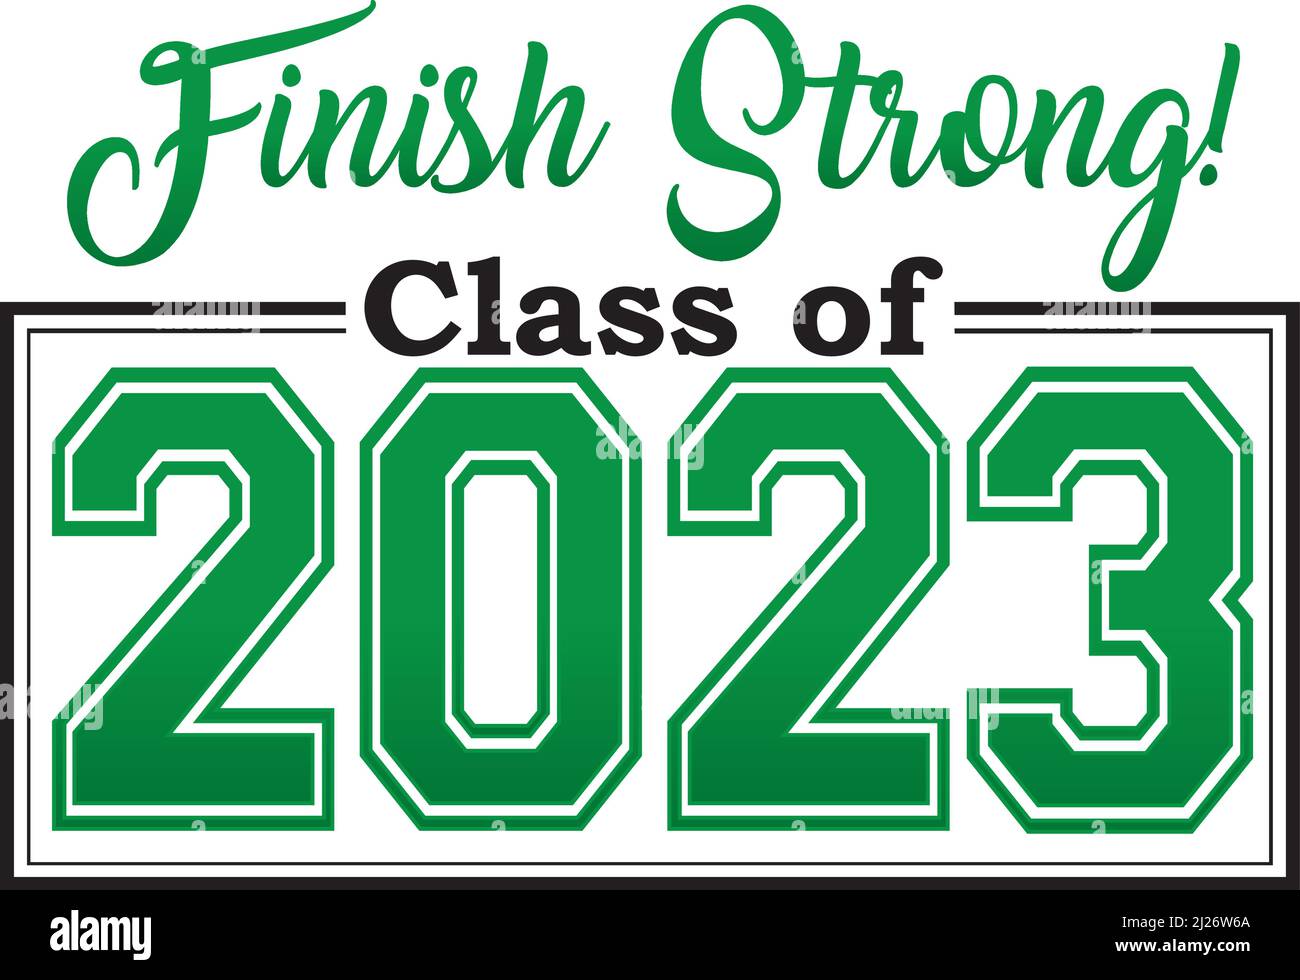 class-of-2023-finish-strong-stock-vector-image-art-alamy